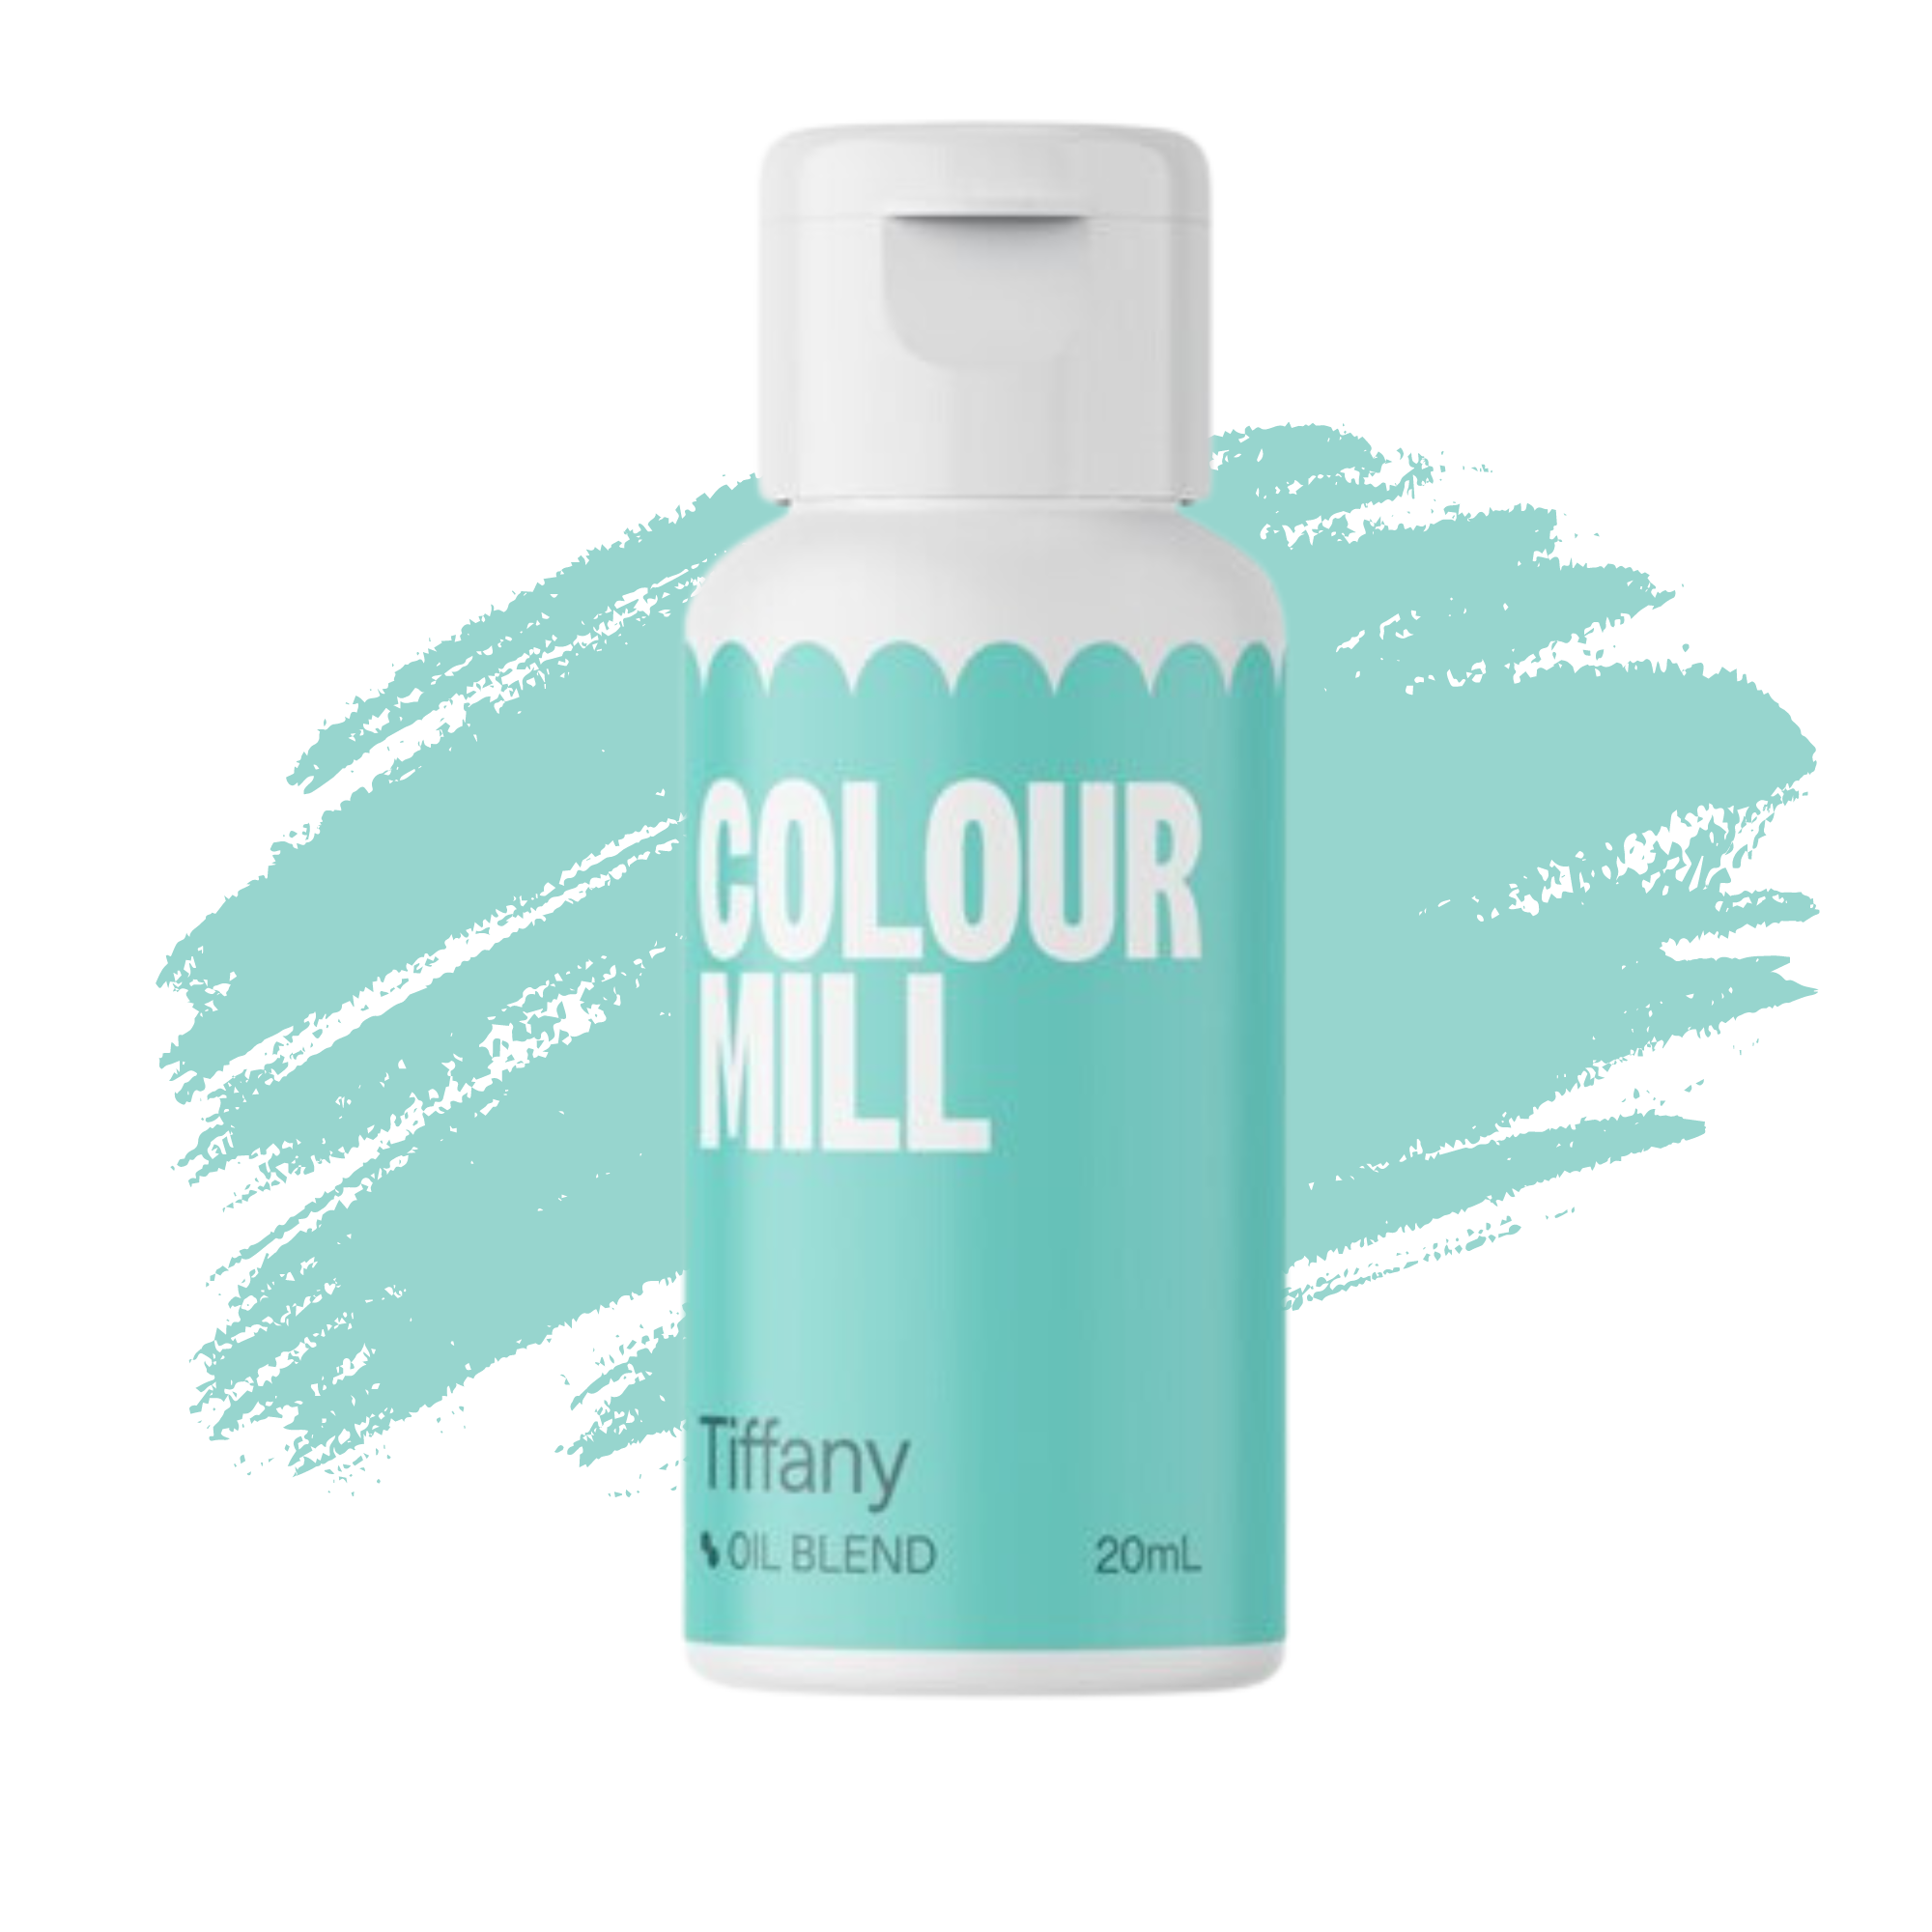 Colour Mill Tiffany Blue Food Colouring (Oil Based), Oil Based Food Colouring, Tiffany Blue Food Colouring, Colour Mill Tiffany Blue